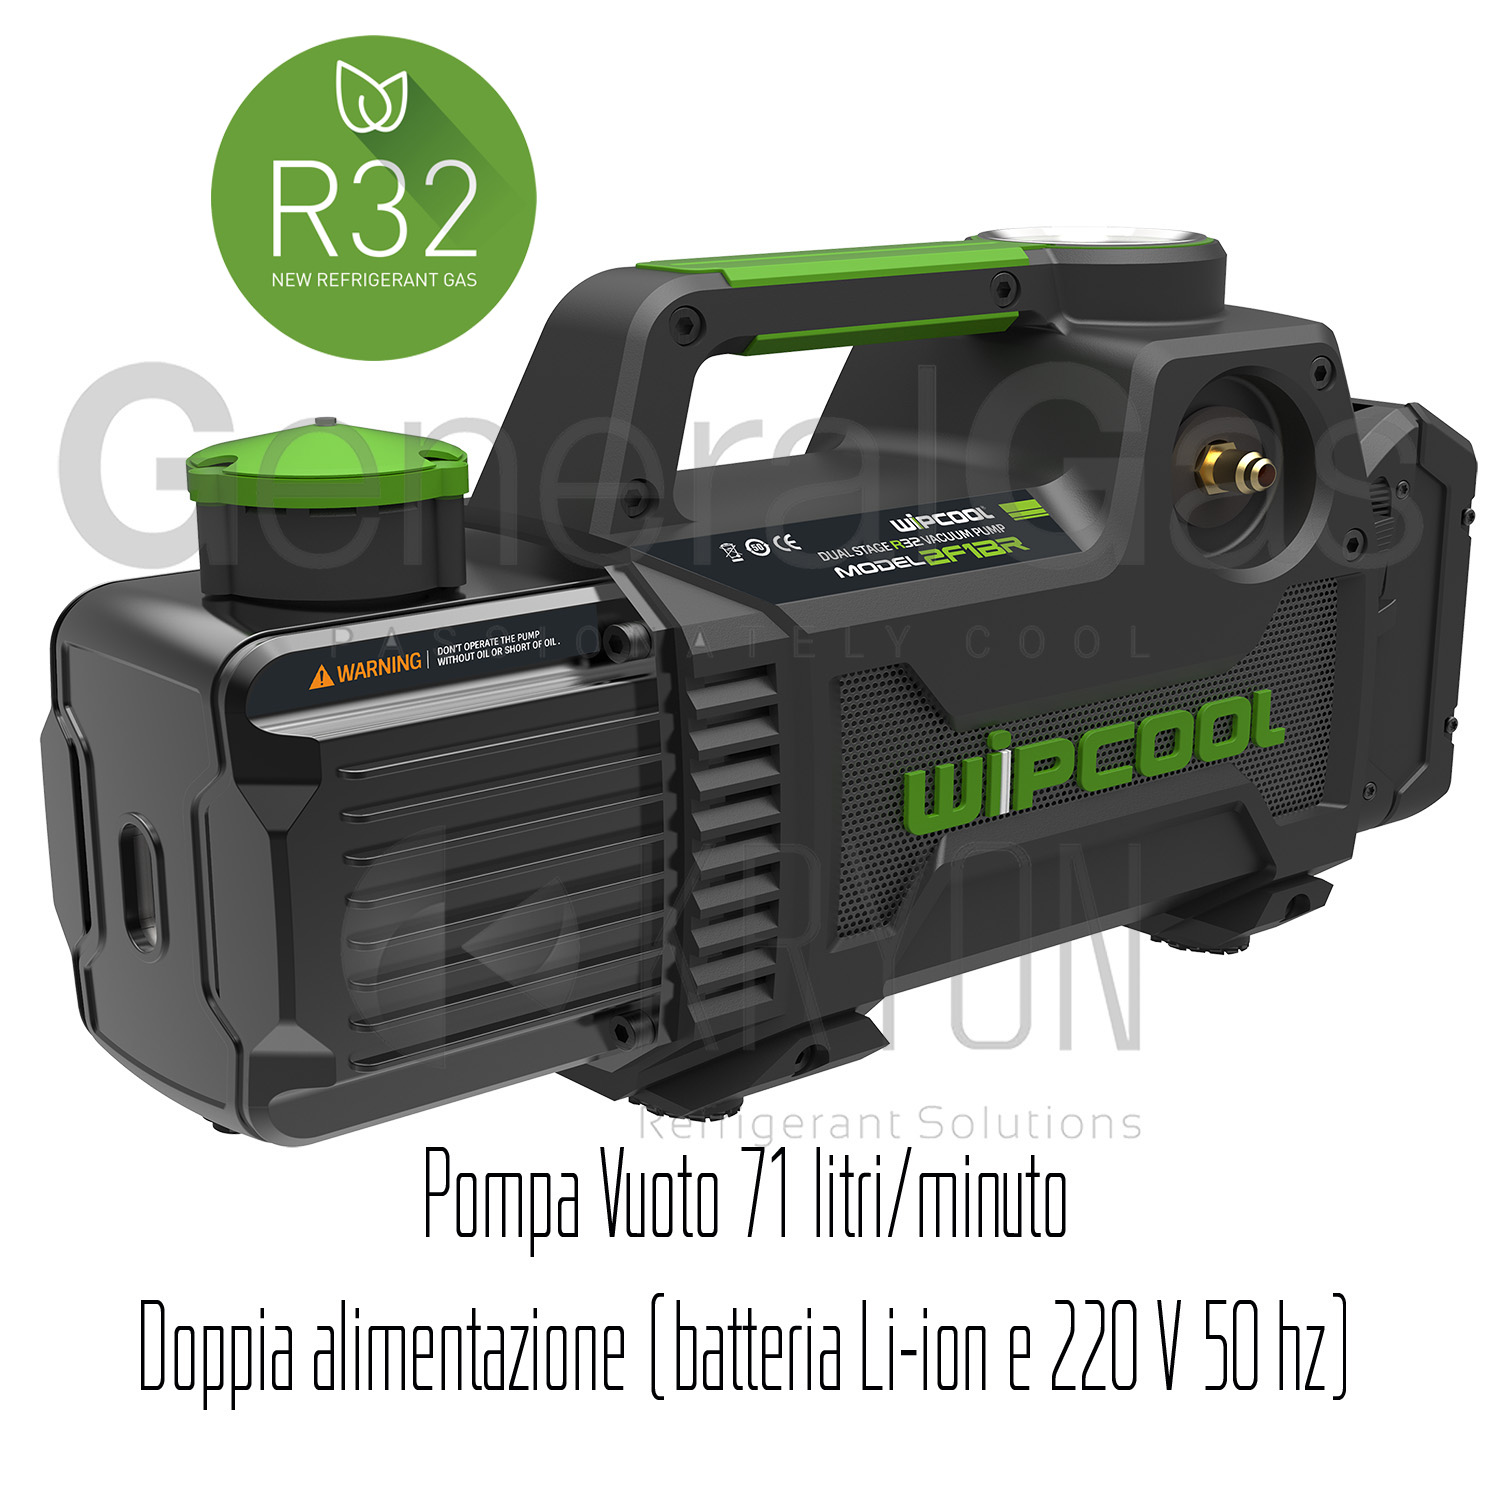 Vacuum pump 2F1BR - two stages, battery operated, flow rate 71 liters/minute, also suitable for R32 and A2L refrigerants (battery not included) - dual power supply:battery + 220V 50Hz